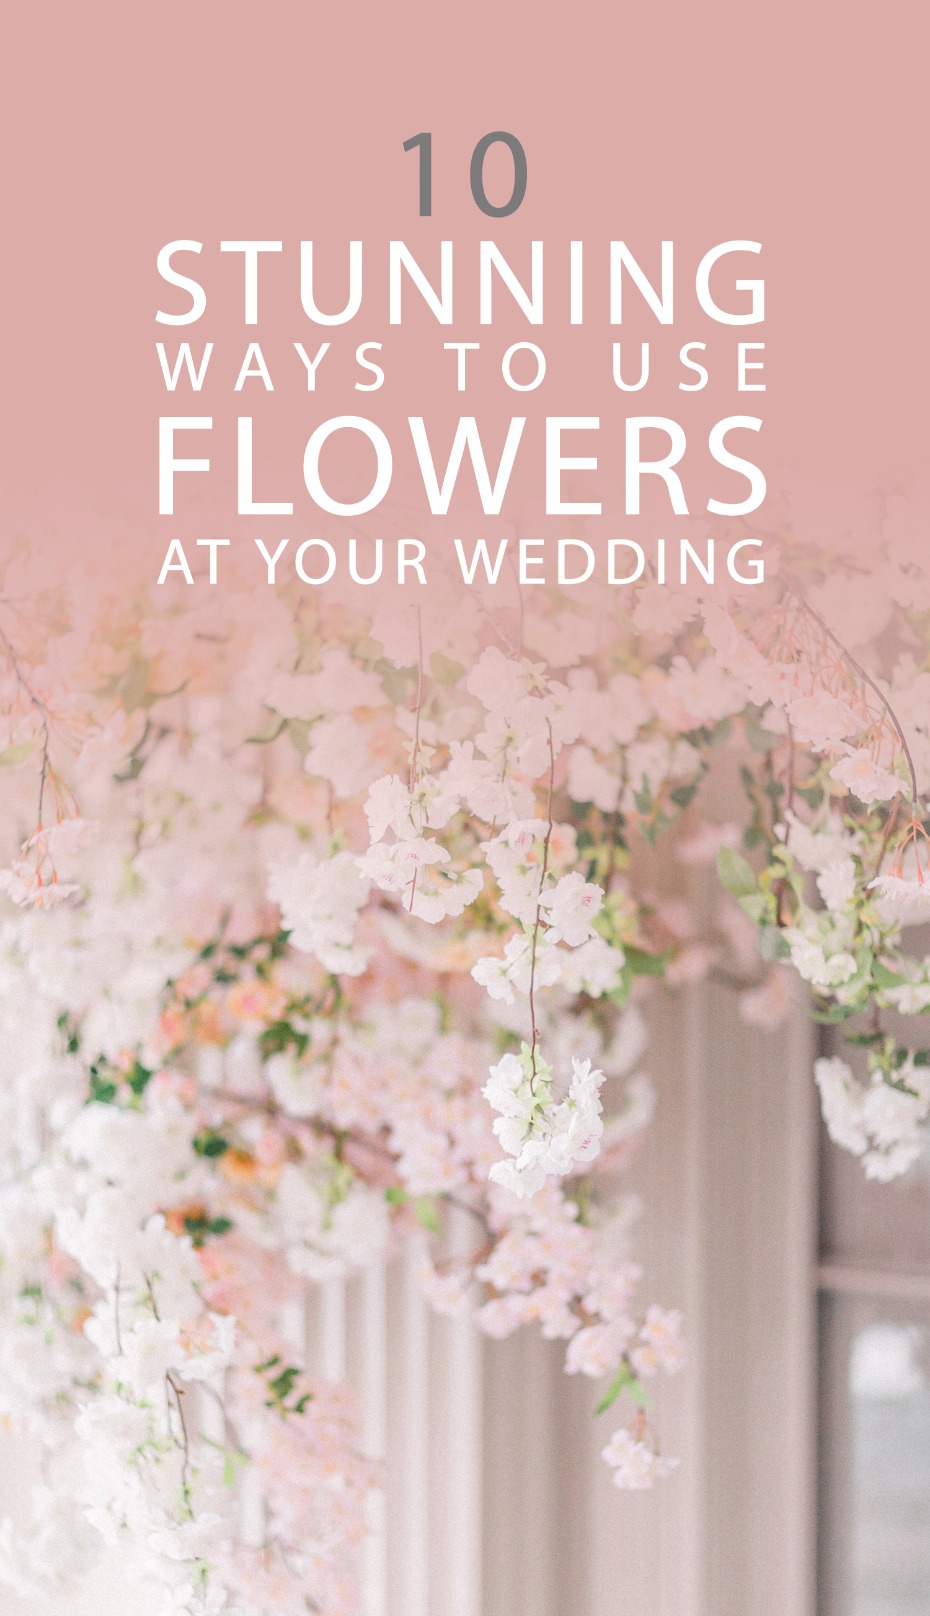 10 stunning ways to use flowers at your wedding